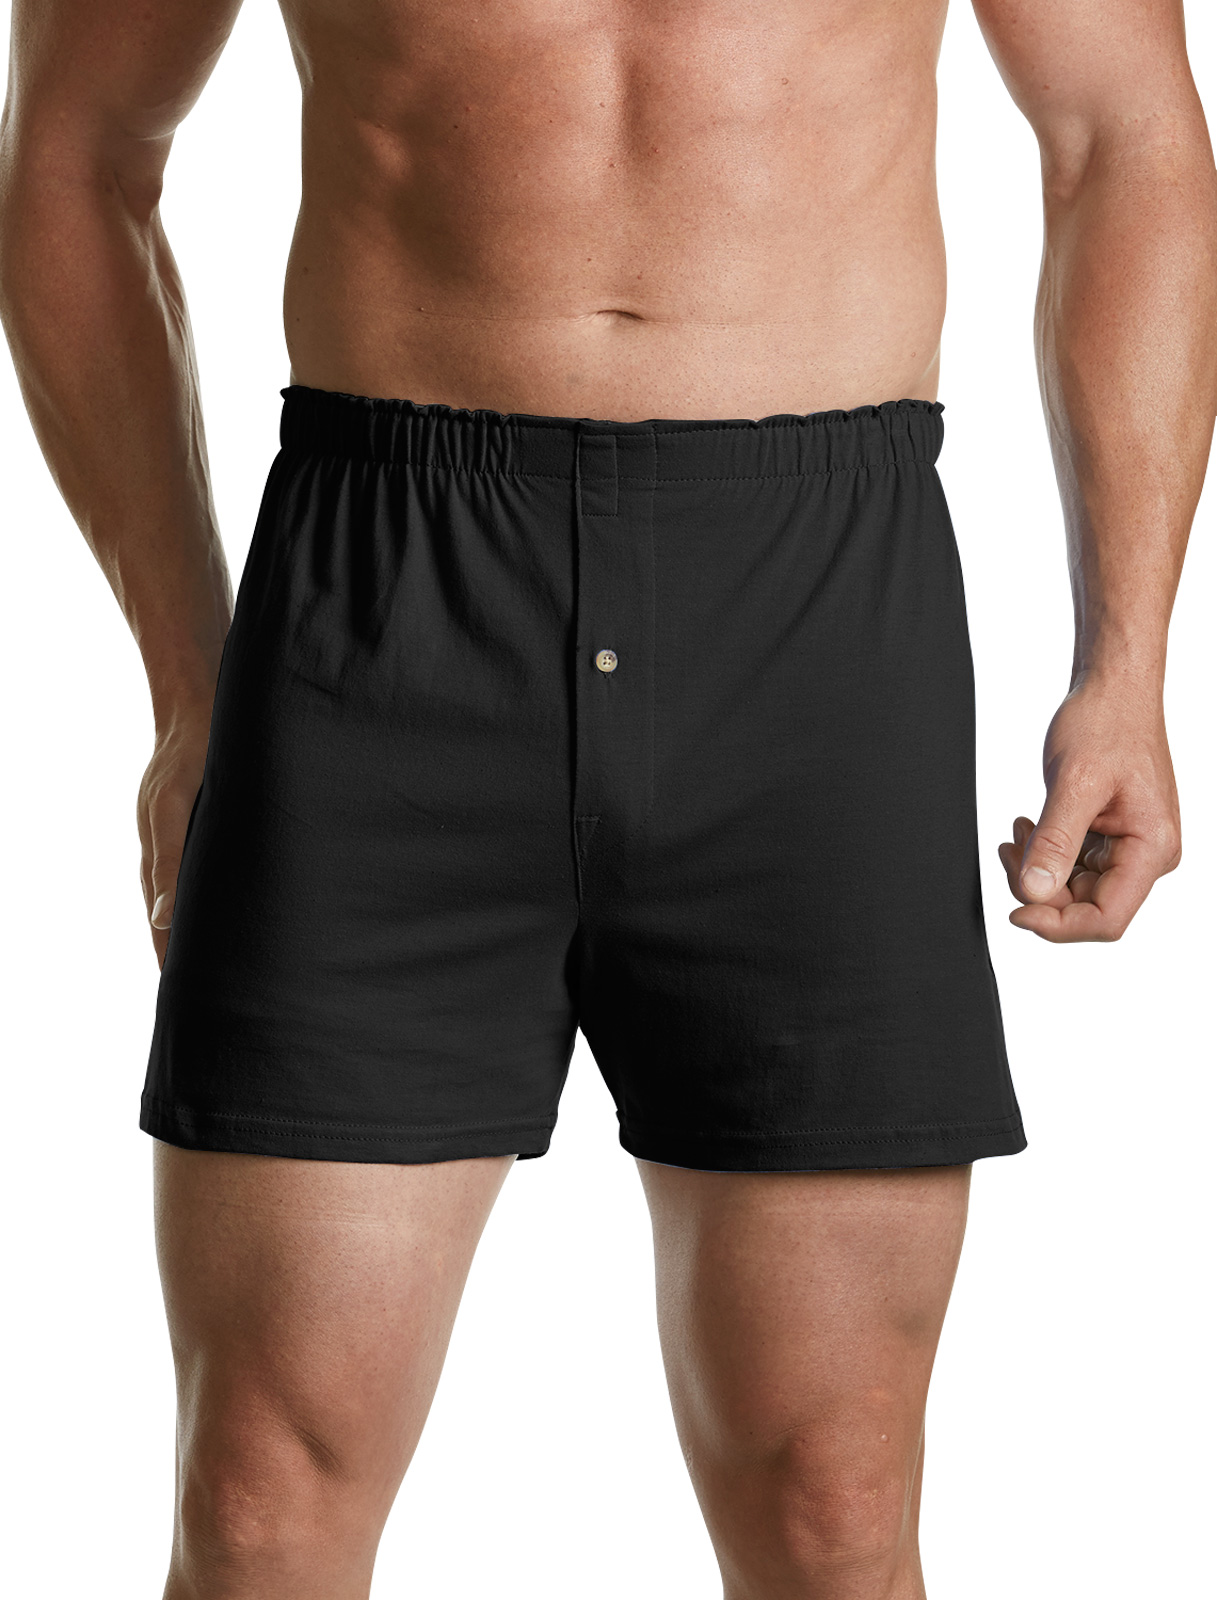 Harbor Bay Men's Big and Tall 3-pk Solid Knit Boxers